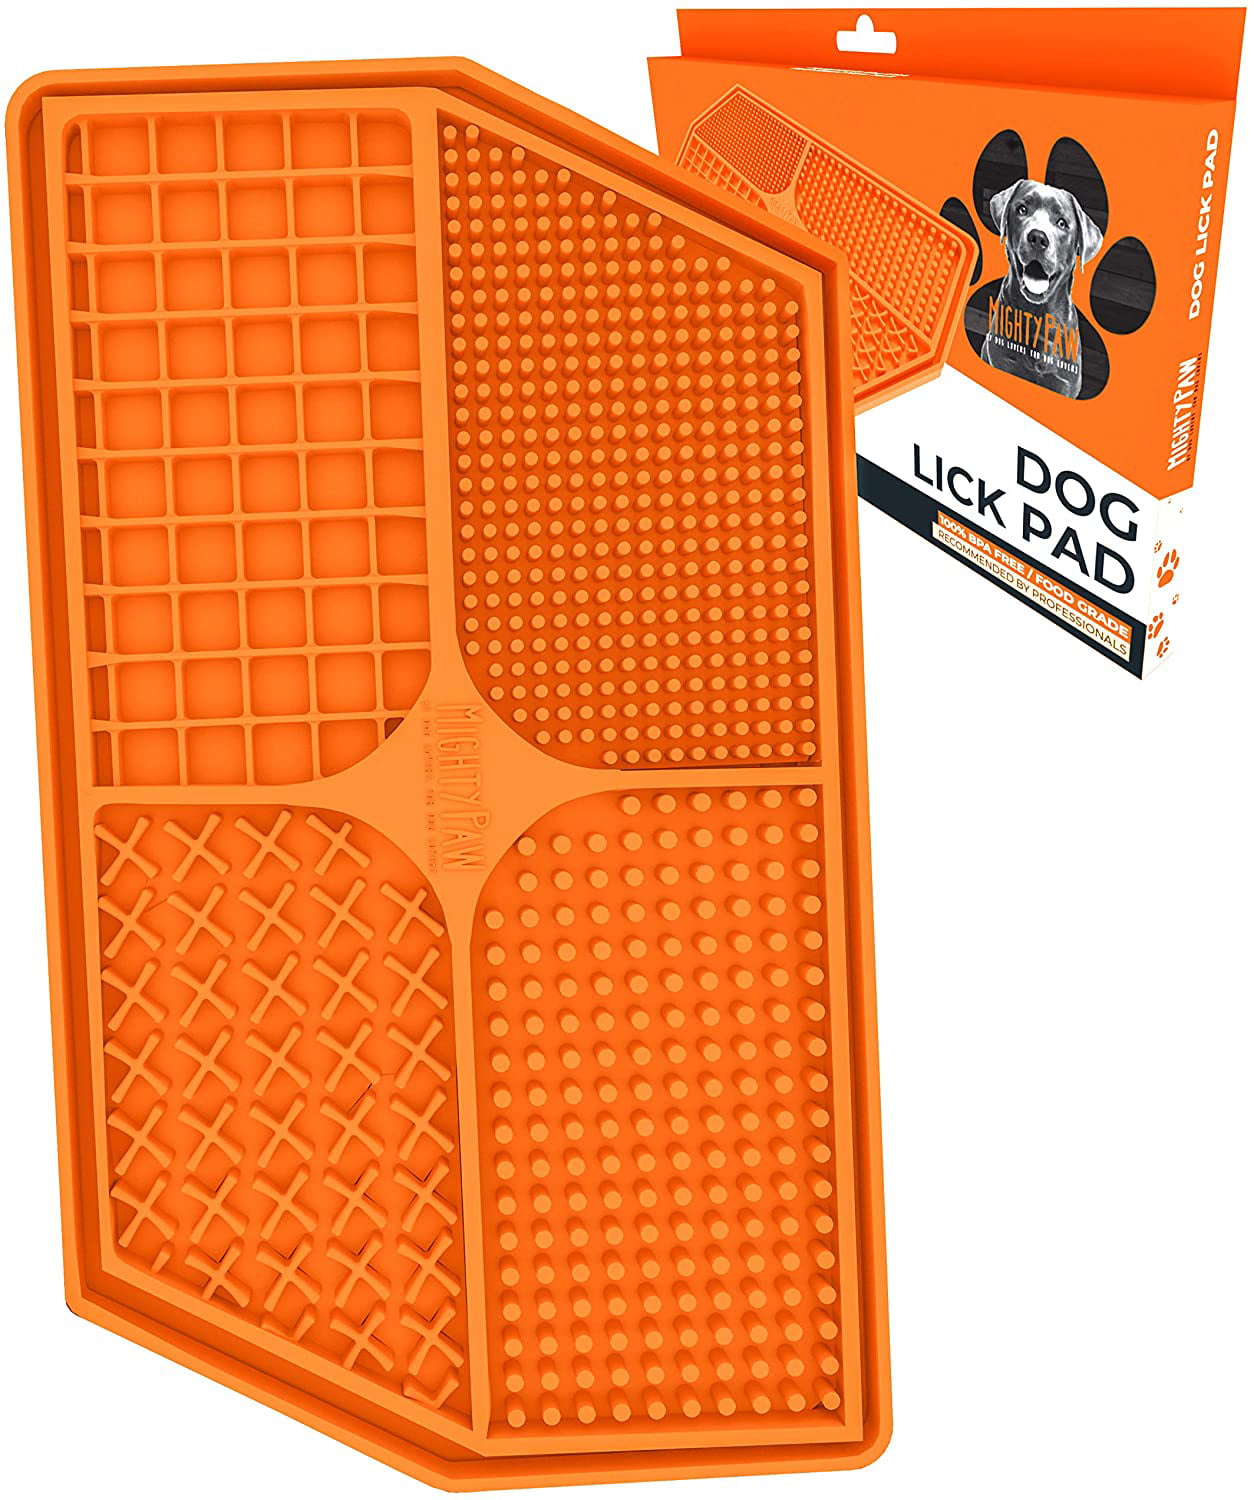  Lick Mat for Dogs Crate Training Aids for Puppies to Digestion  Hard Chew Proof Puppy Pads Dog Lick Mat Coniengk Dog Toys Licking Pad Mat  Relieve Boredom and Anxiety Relief 